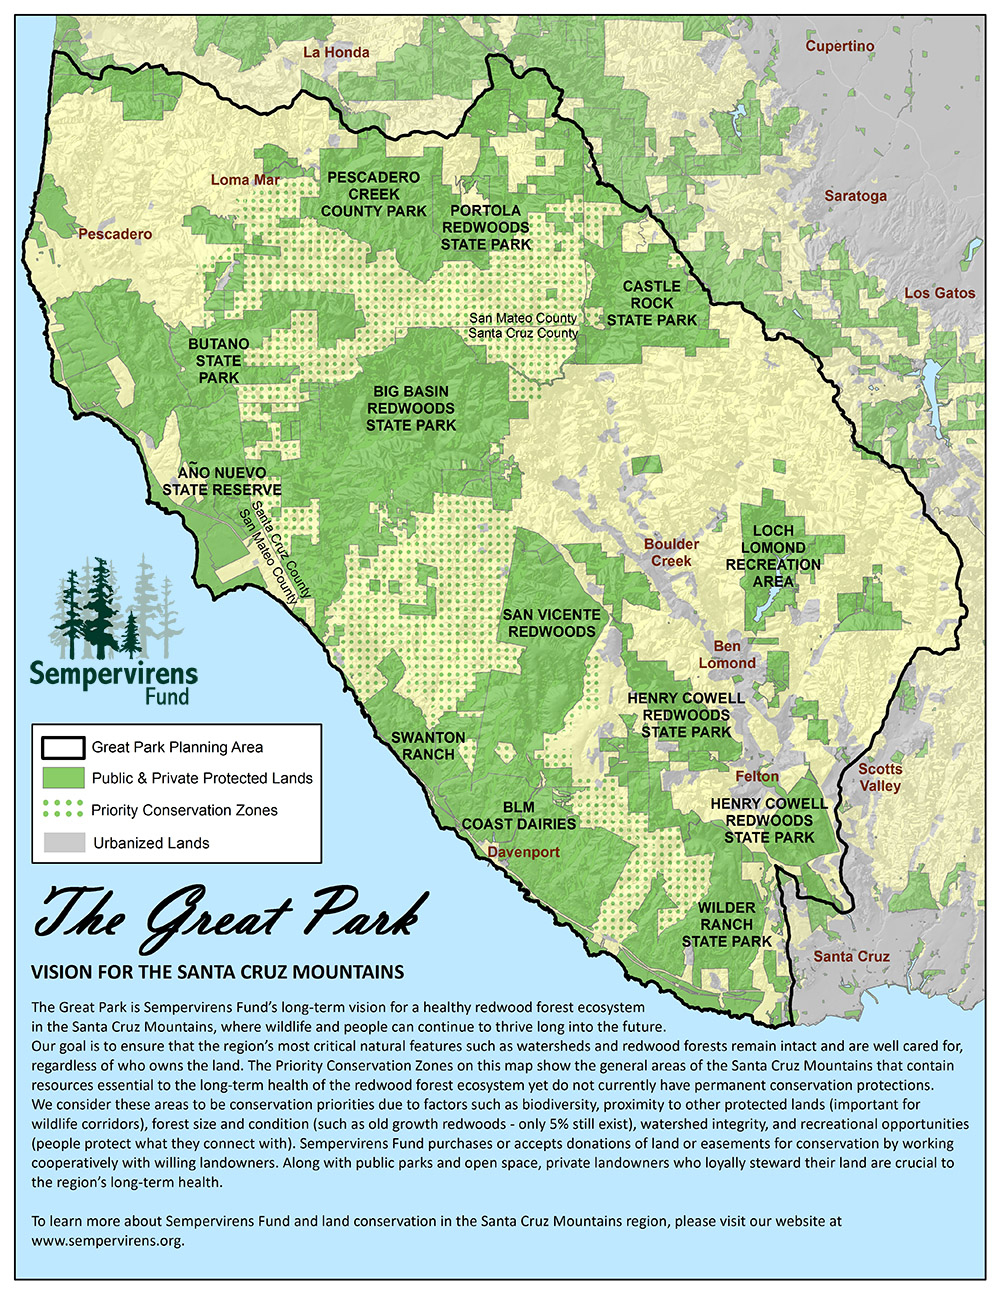 The Great Park Map Of California Springs California Giant Redwoods - Giant Redwoods California Map